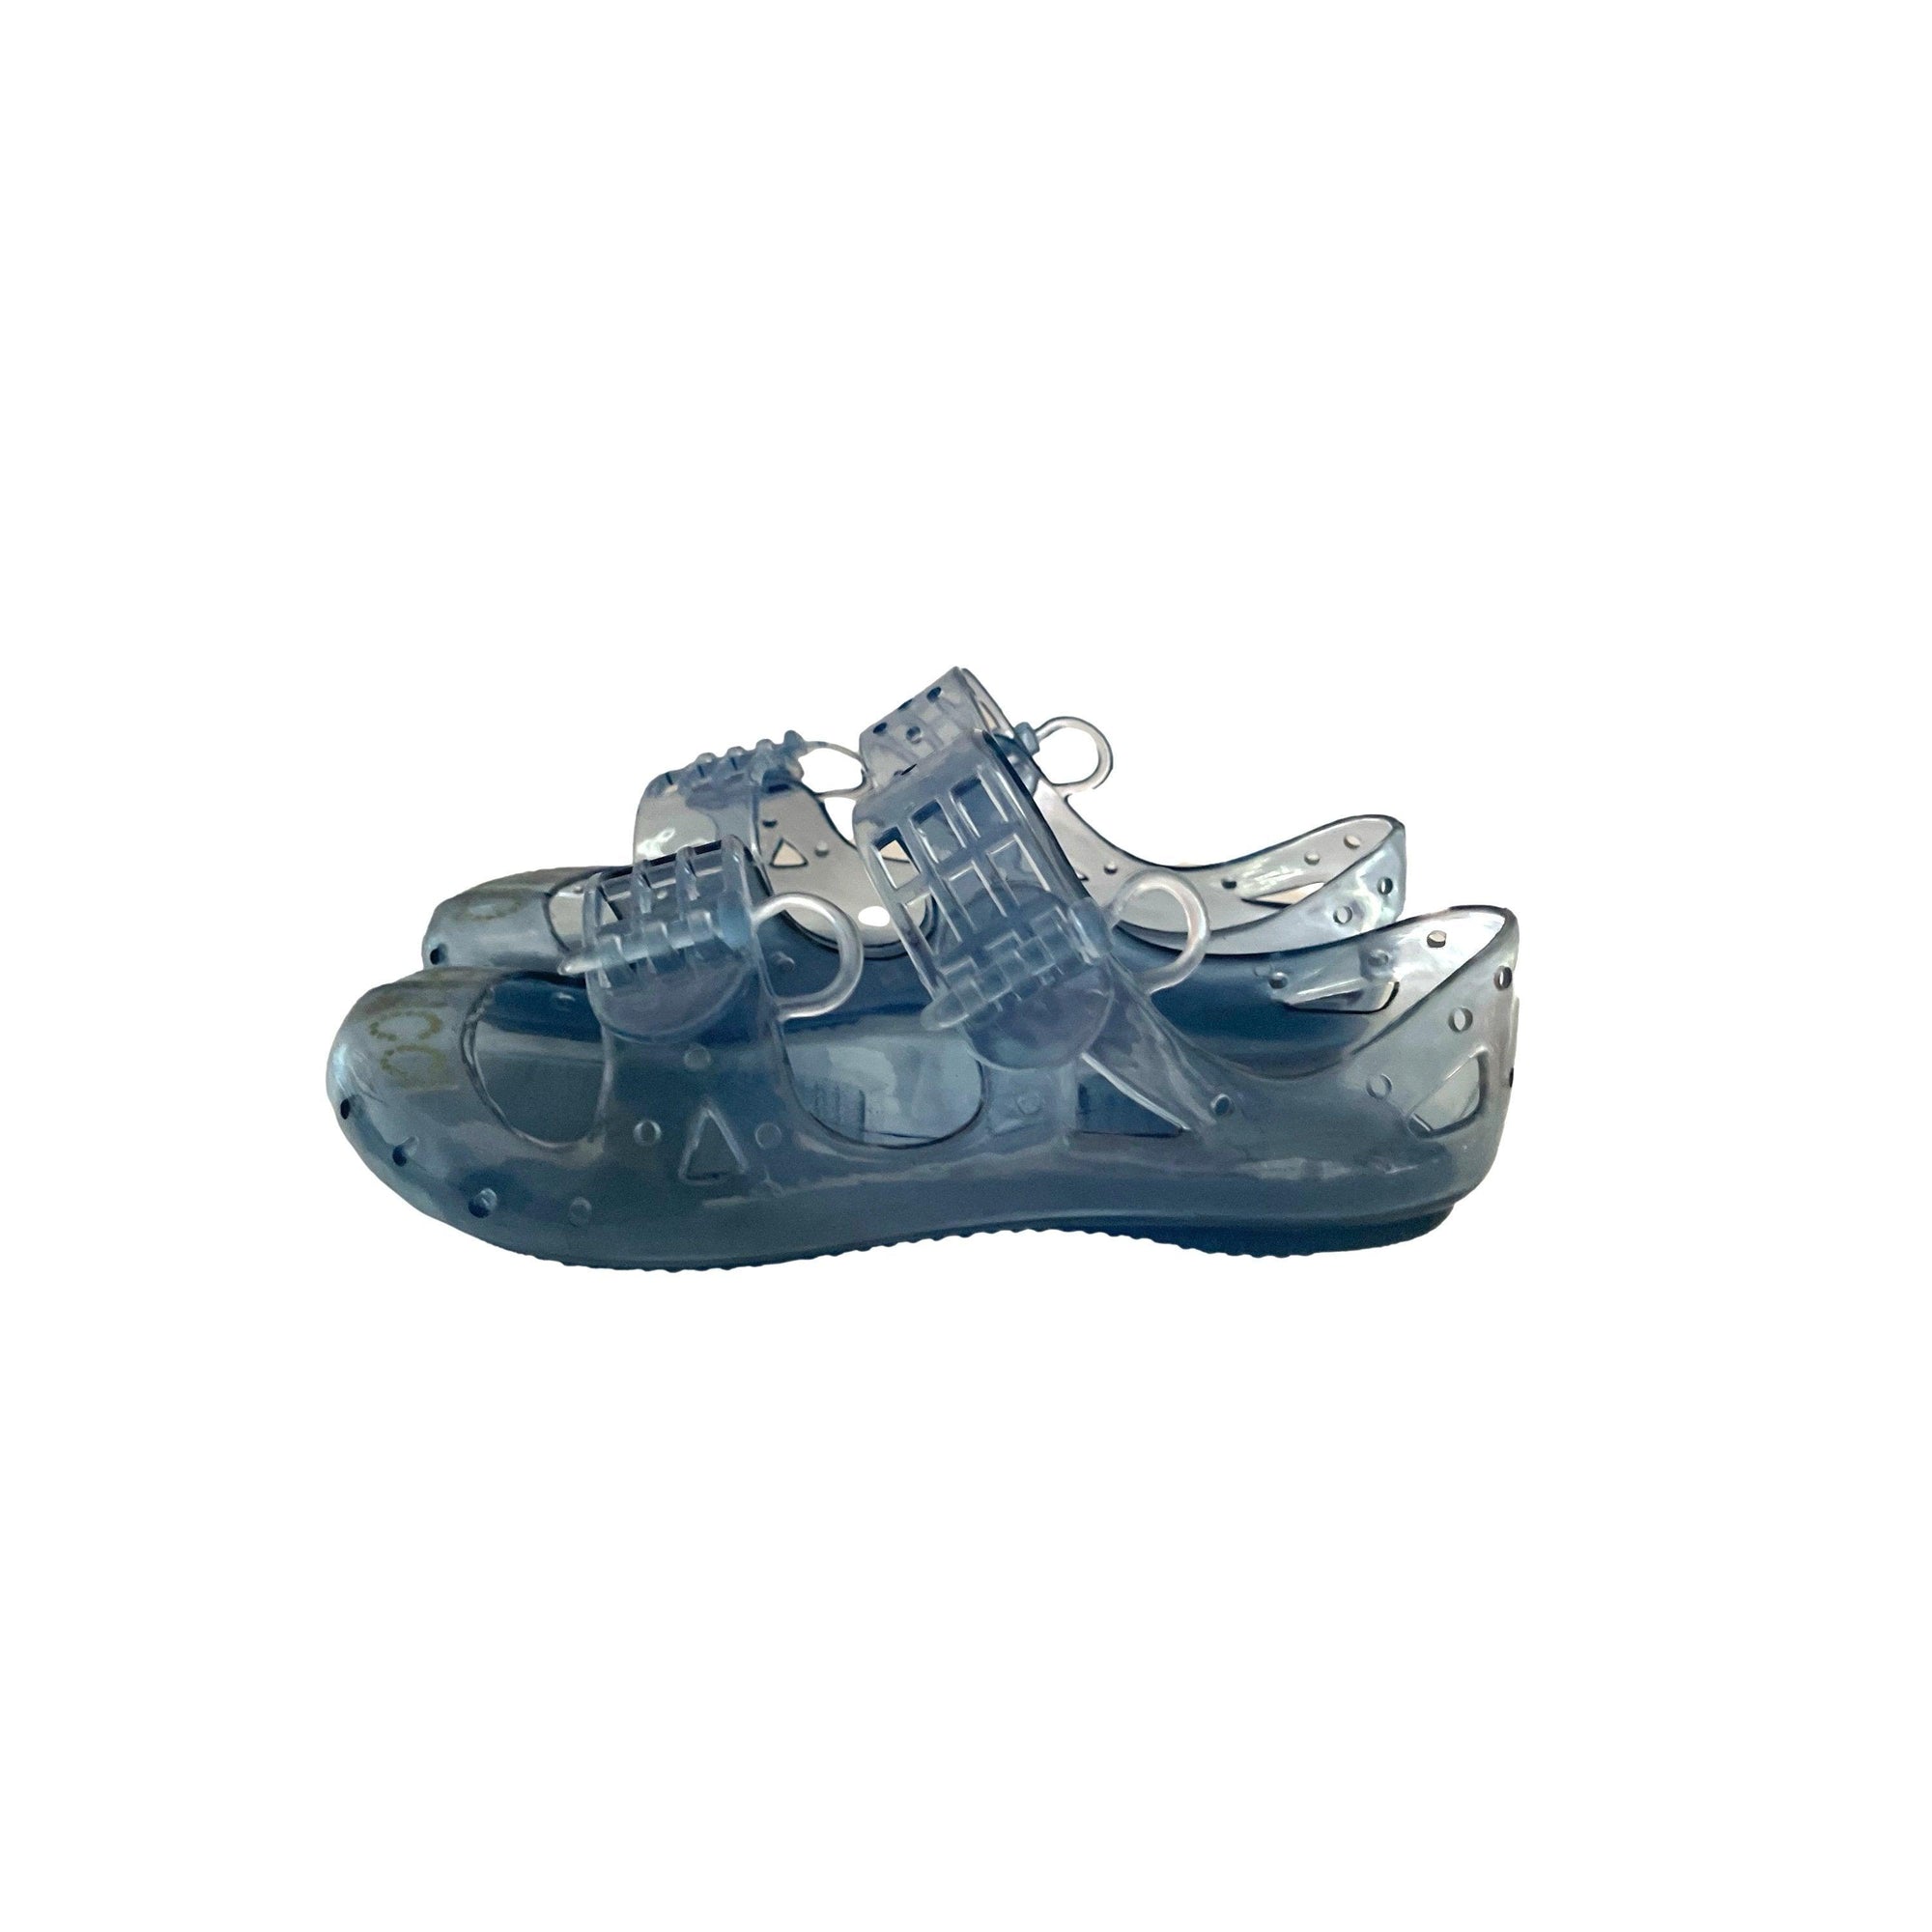 Pucci Blueberry Jelly Shoes - Shoes